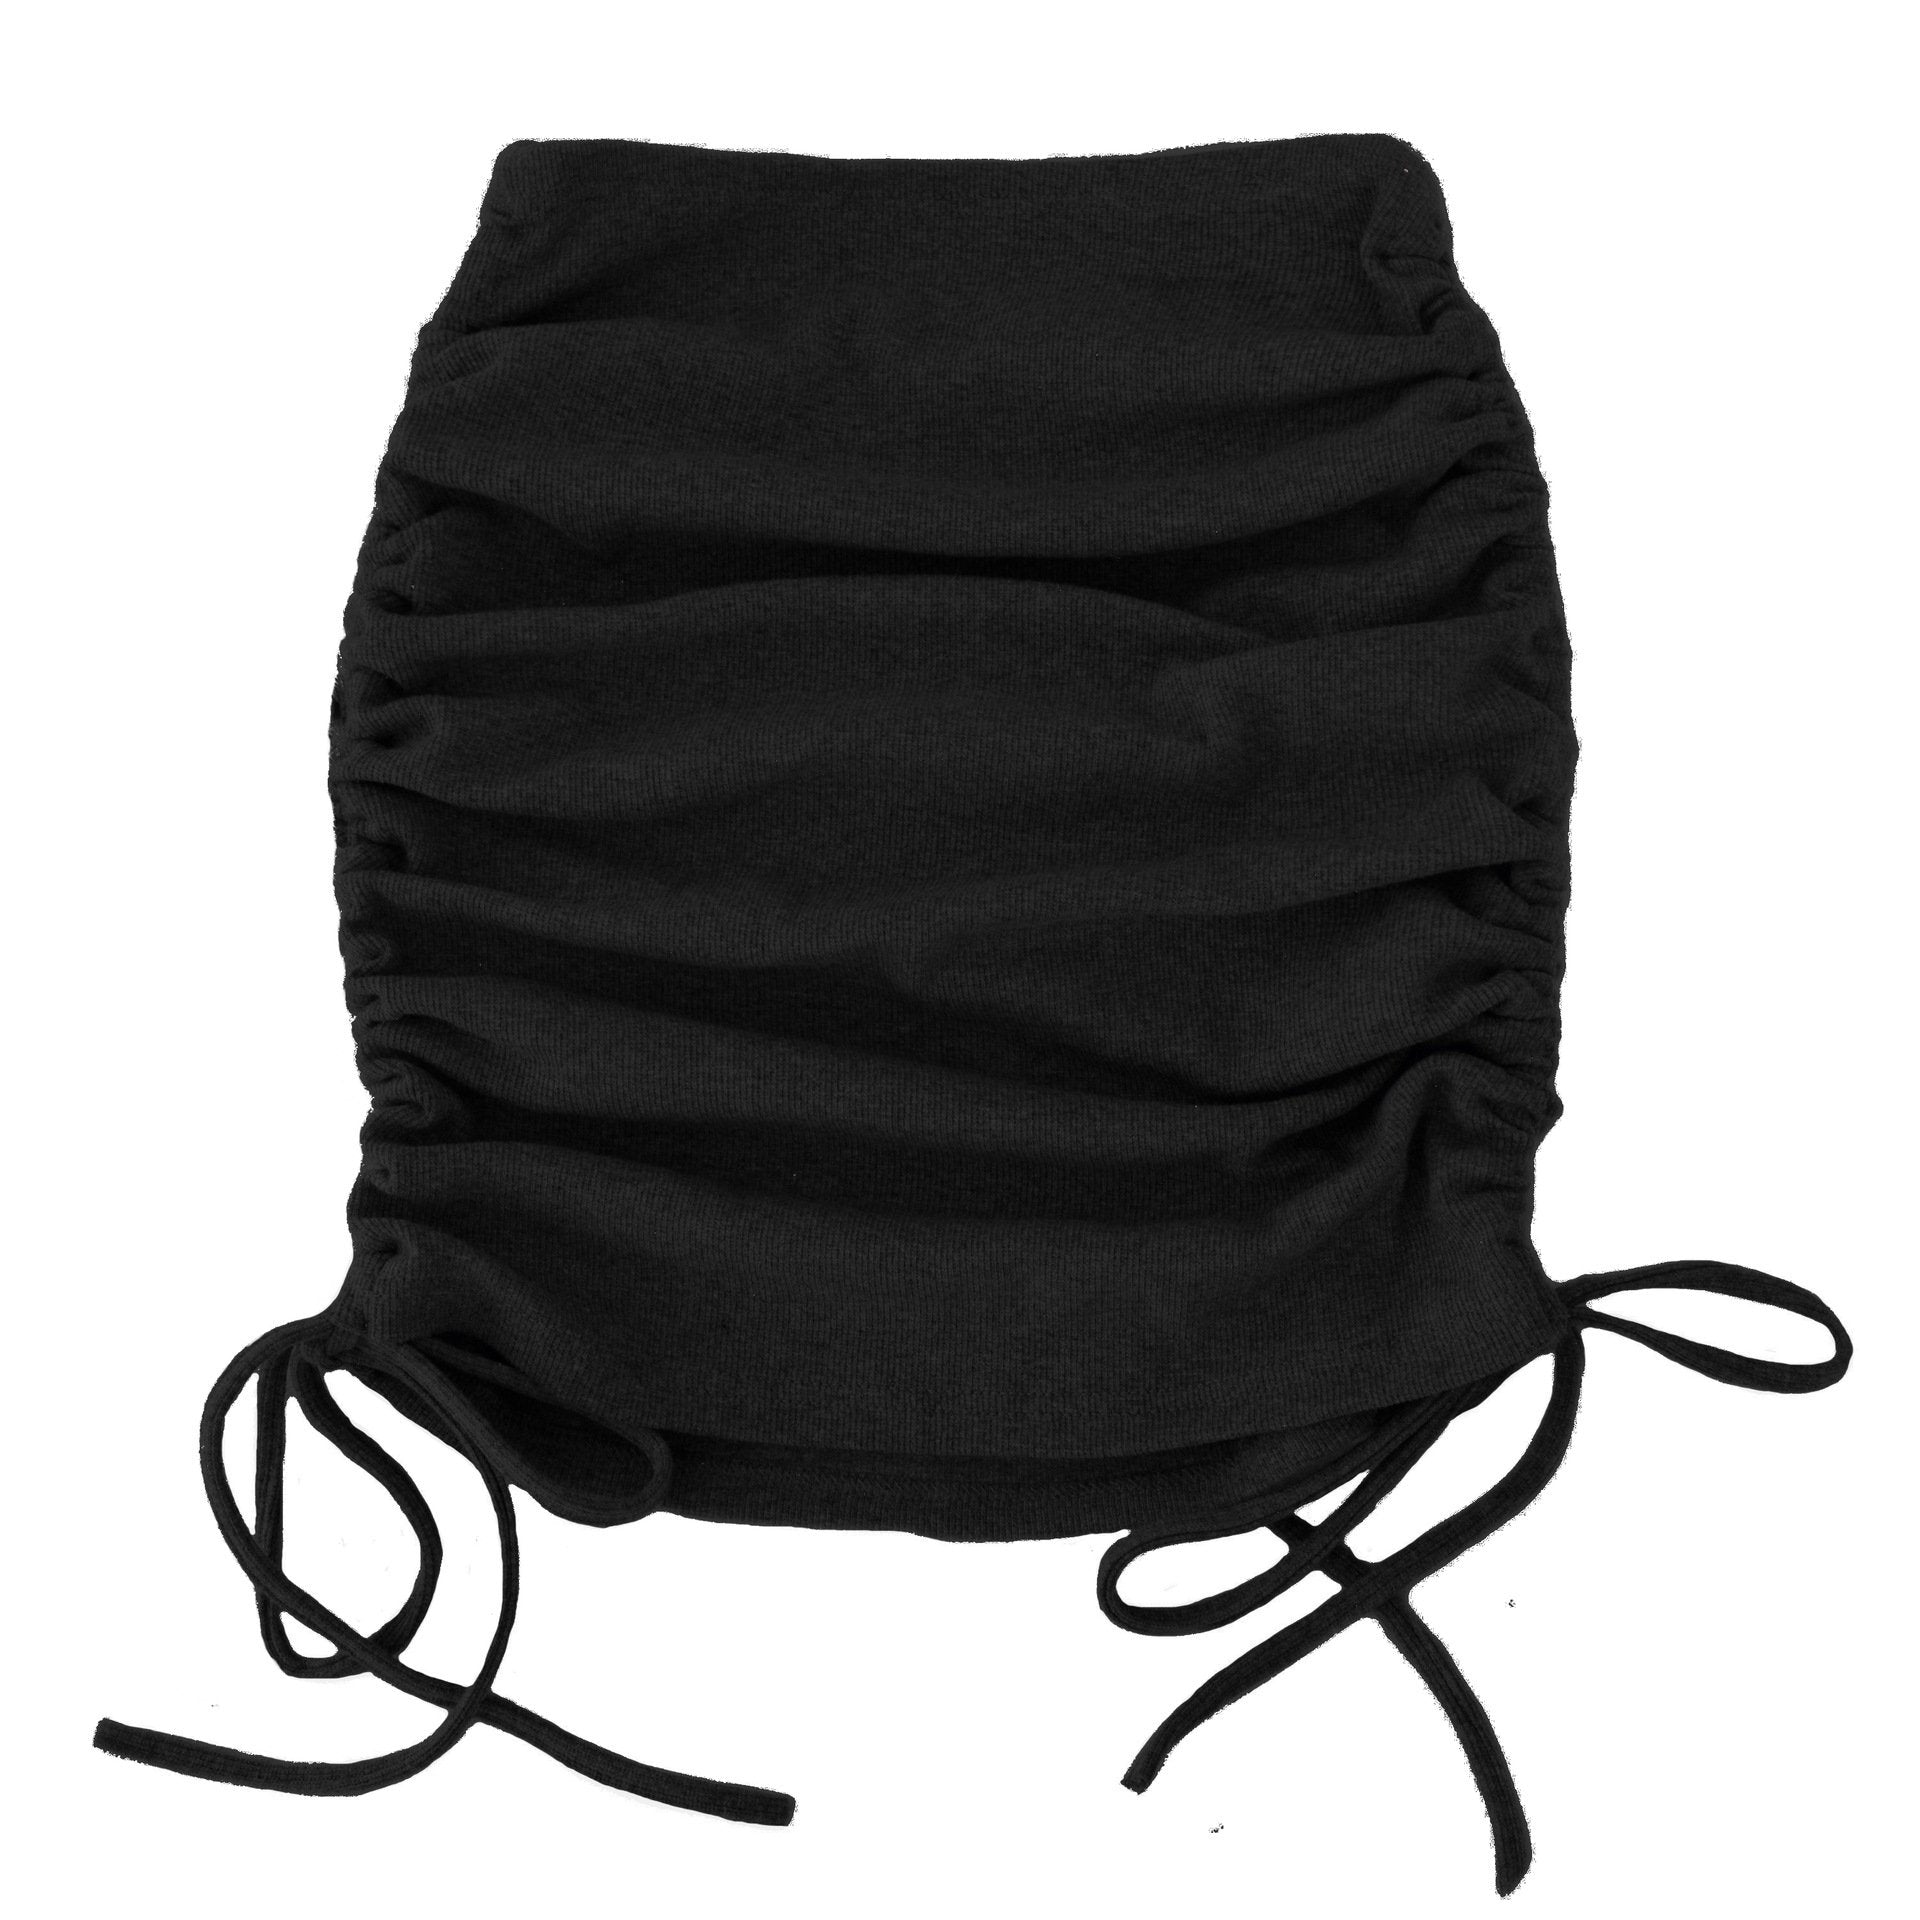 Ruched Double Sided Drawstring Mini Skirt | Rainbow Aesthetic